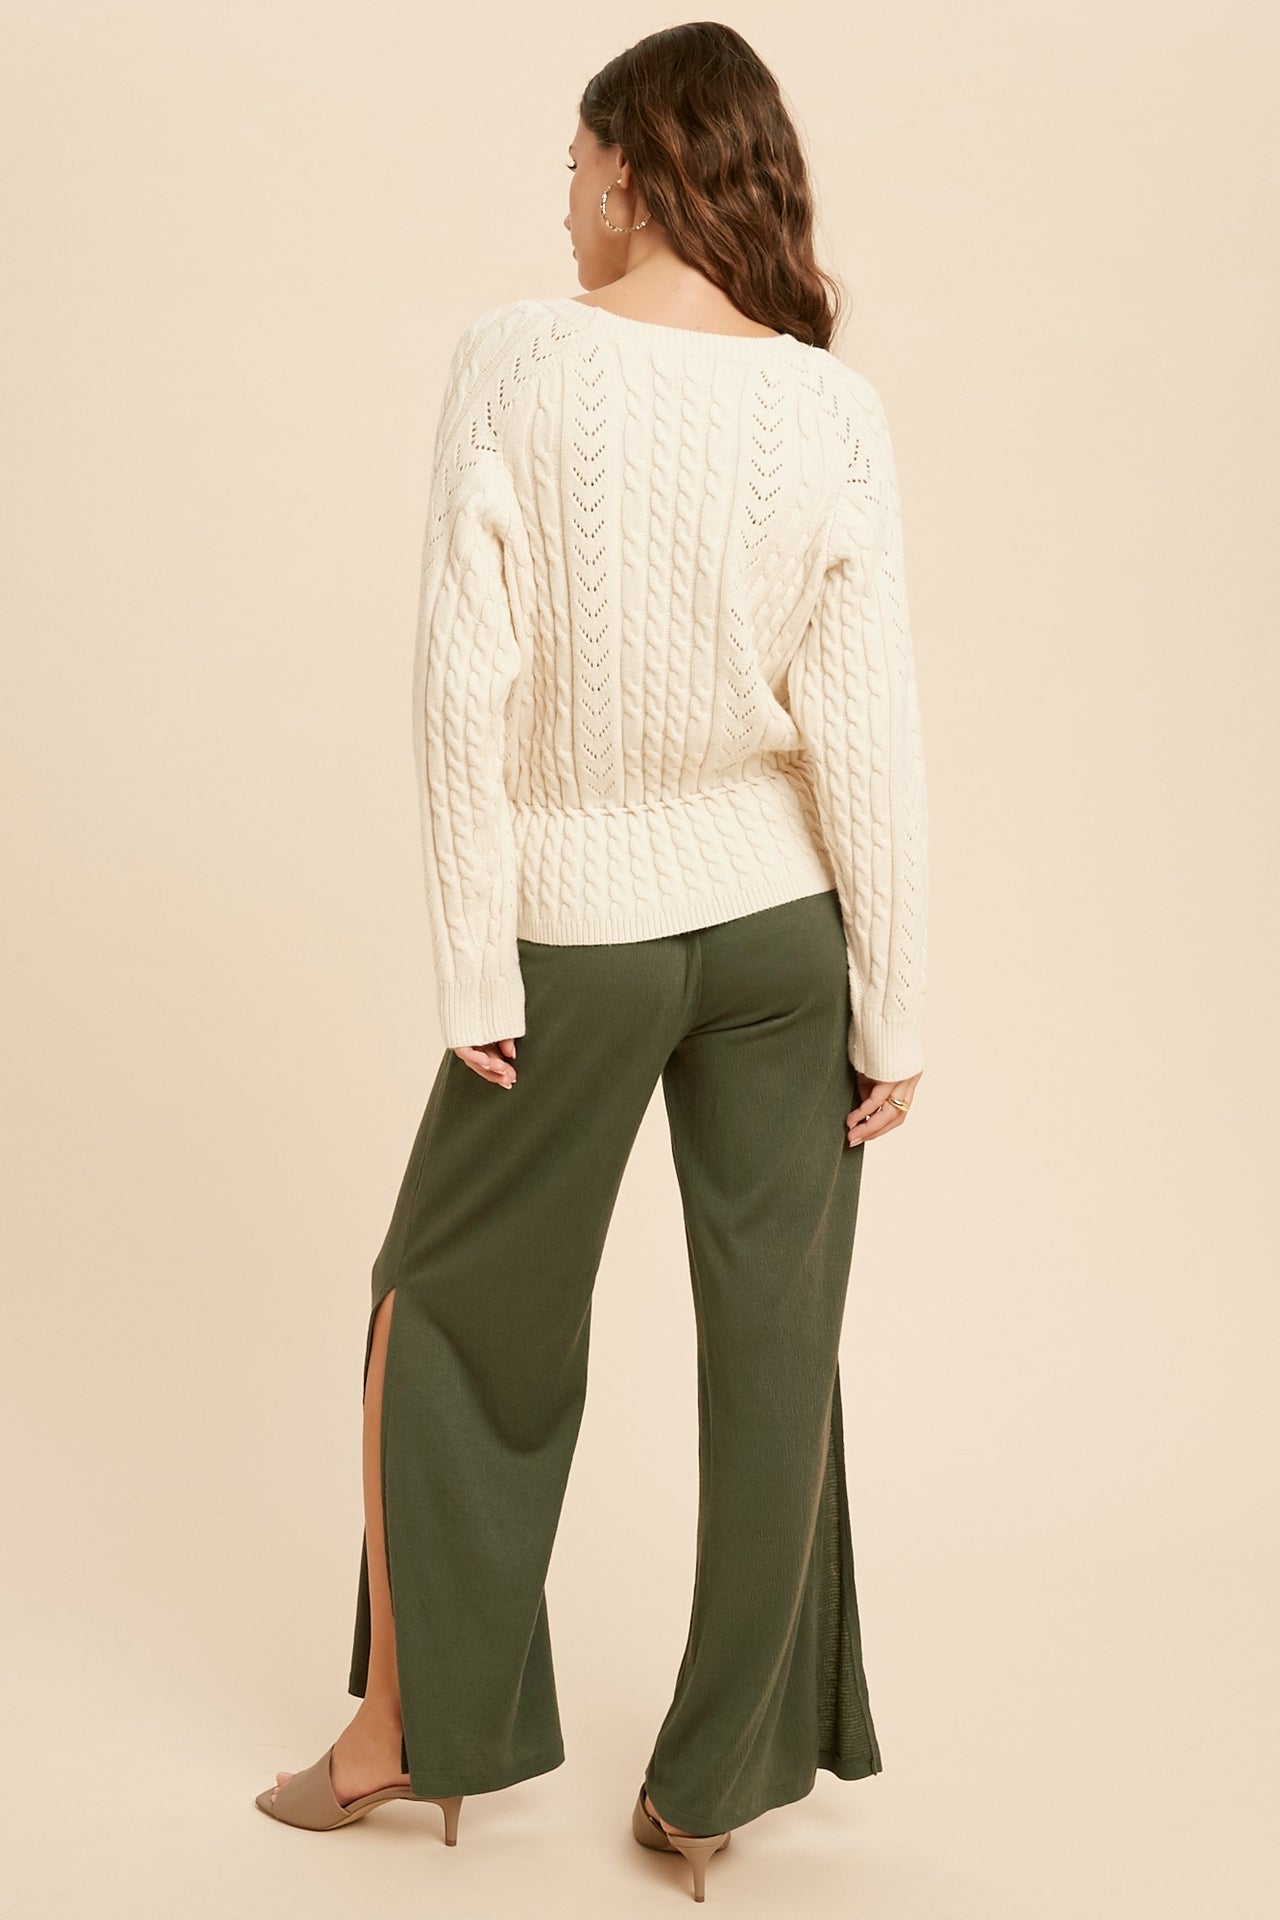 Cable Knit Drawstring Long Sleeve Sweater in cream color. Back view.